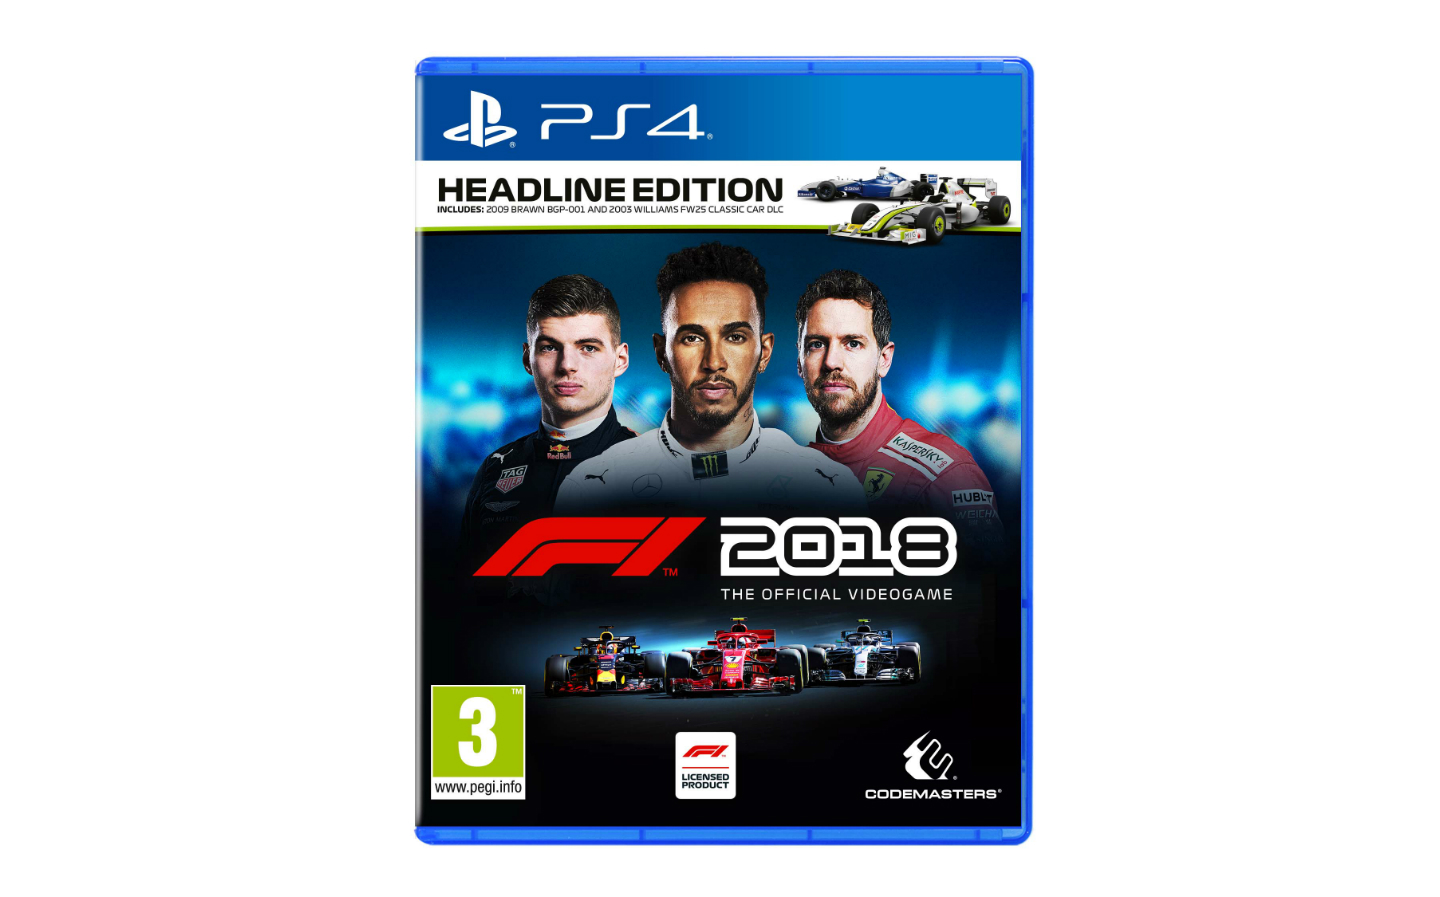 Christmas gifts: F1 2018 Formula One racing game for Xbox, PS4 and PC